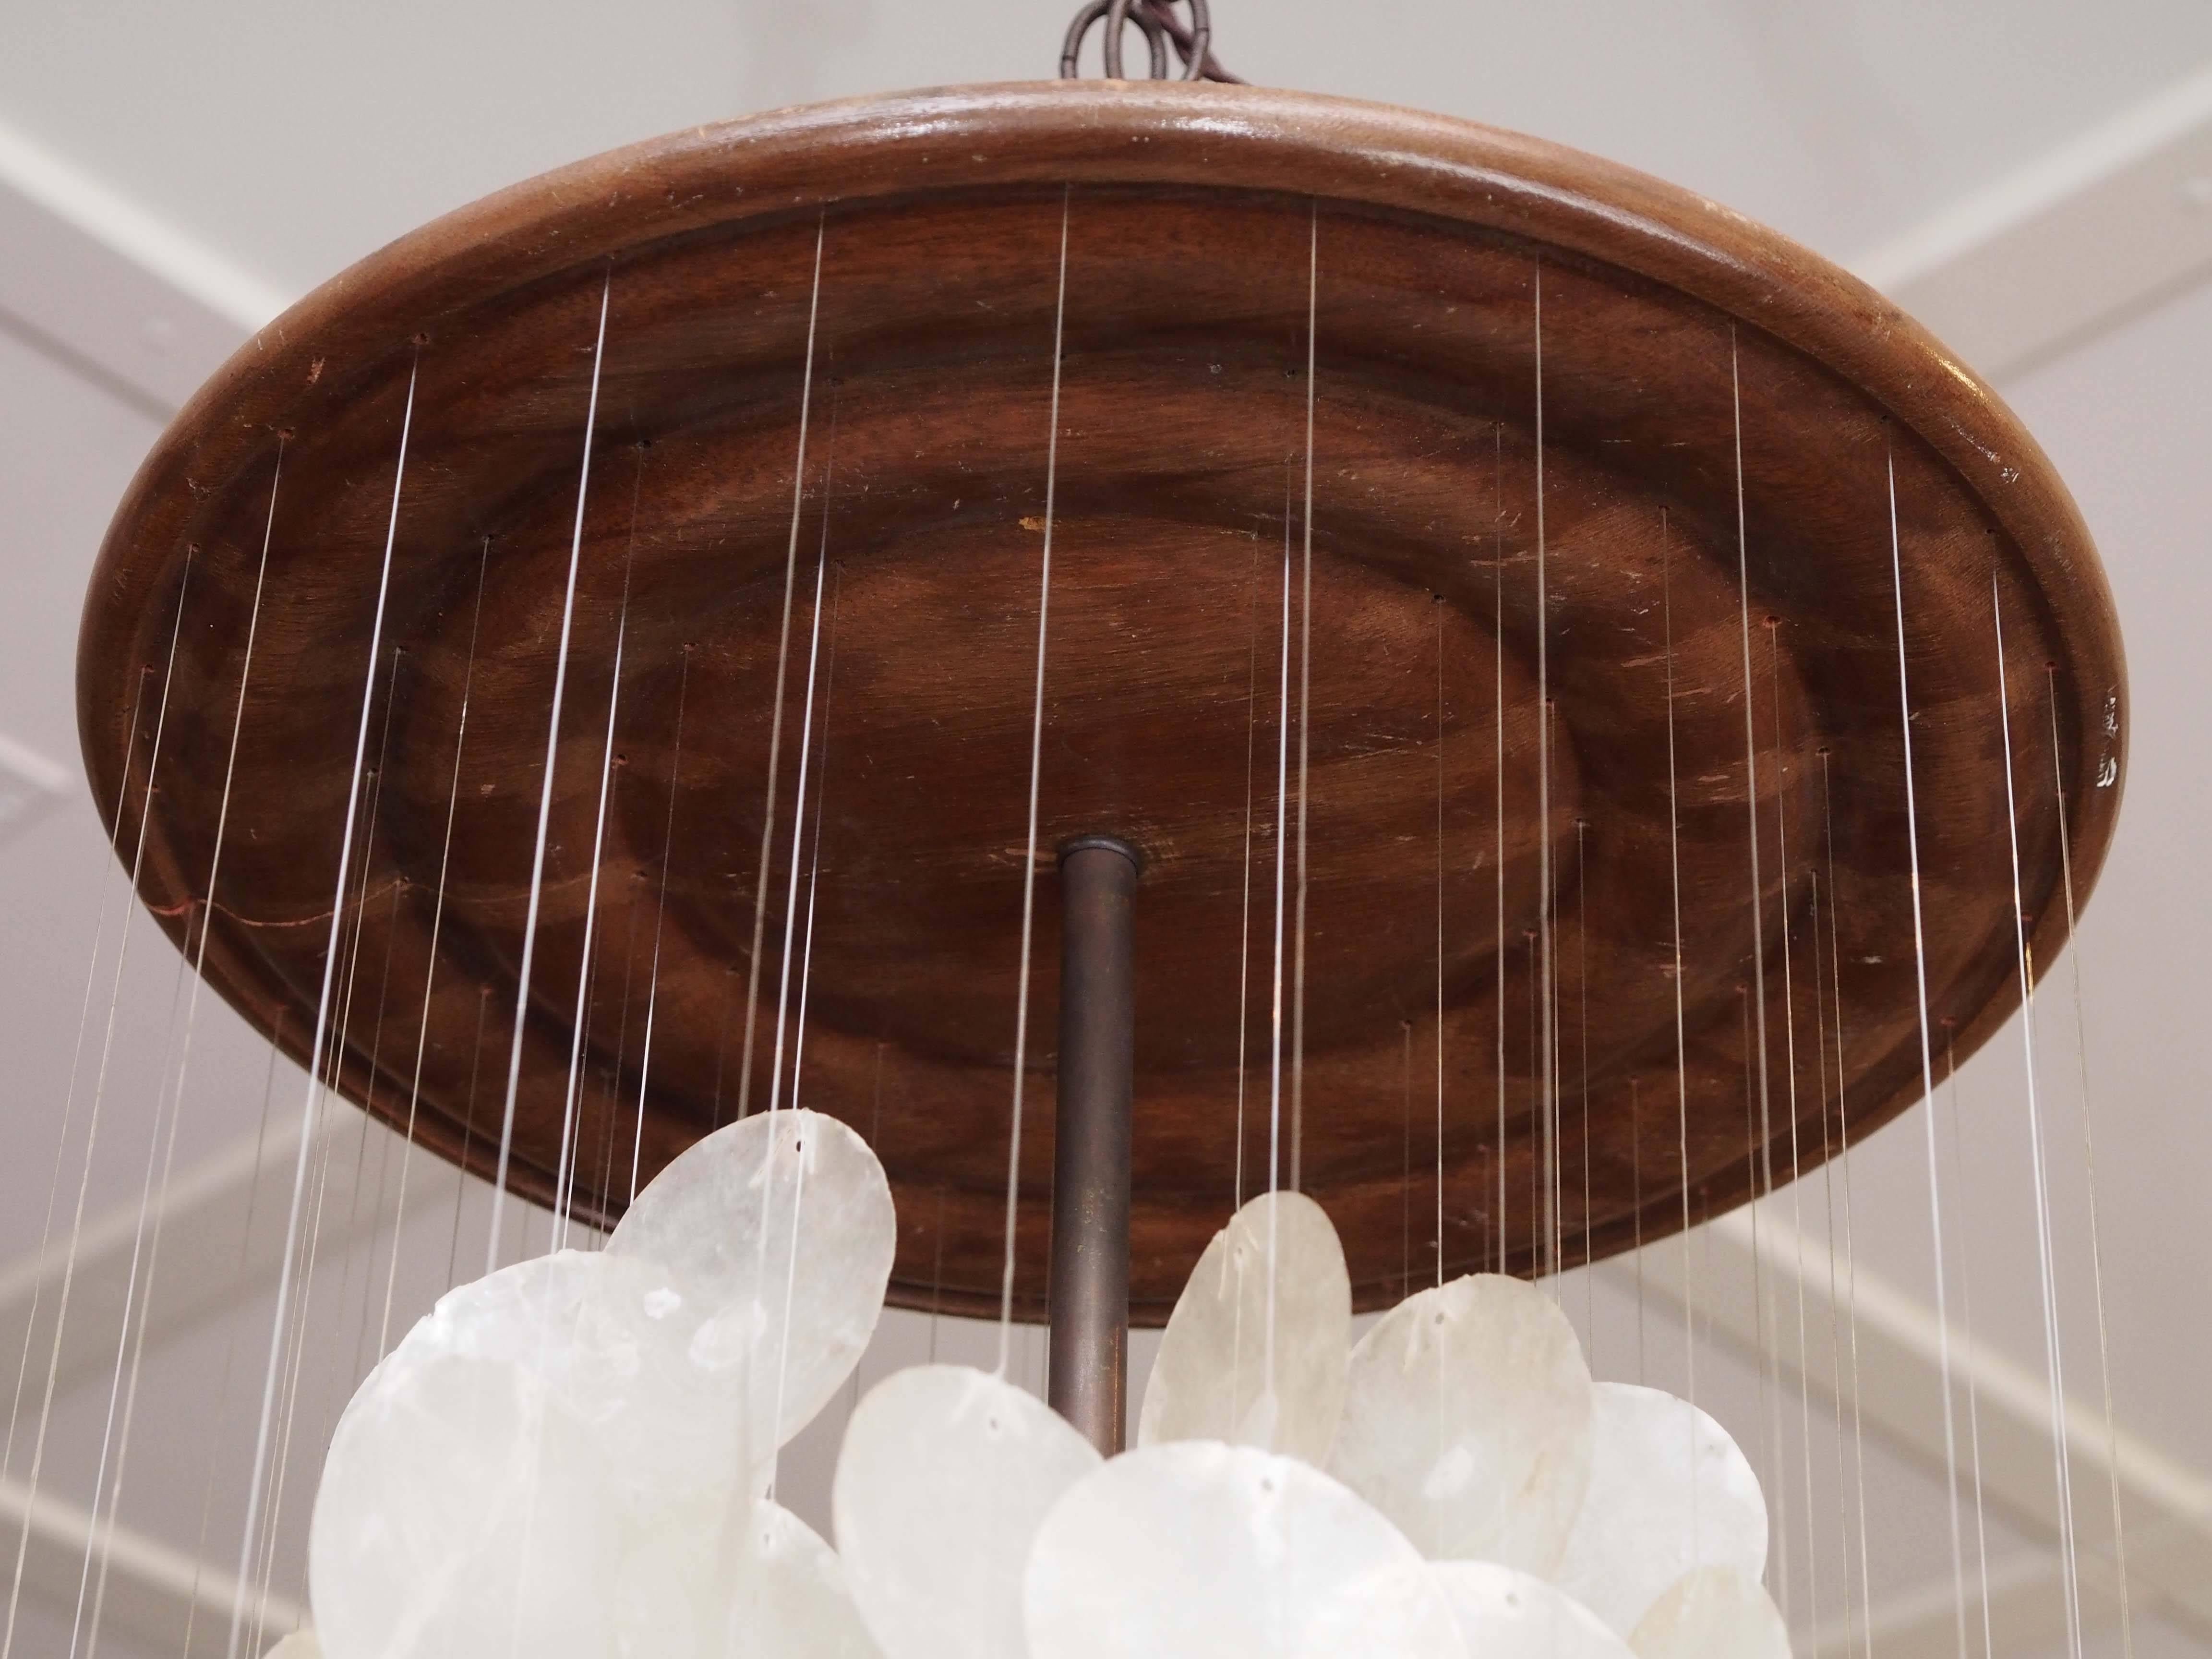 20th century Danish chandelier by Vernor Panton made with capiz shells hanging from translucent wires suspended from a walnut medallion, circa 1960s.